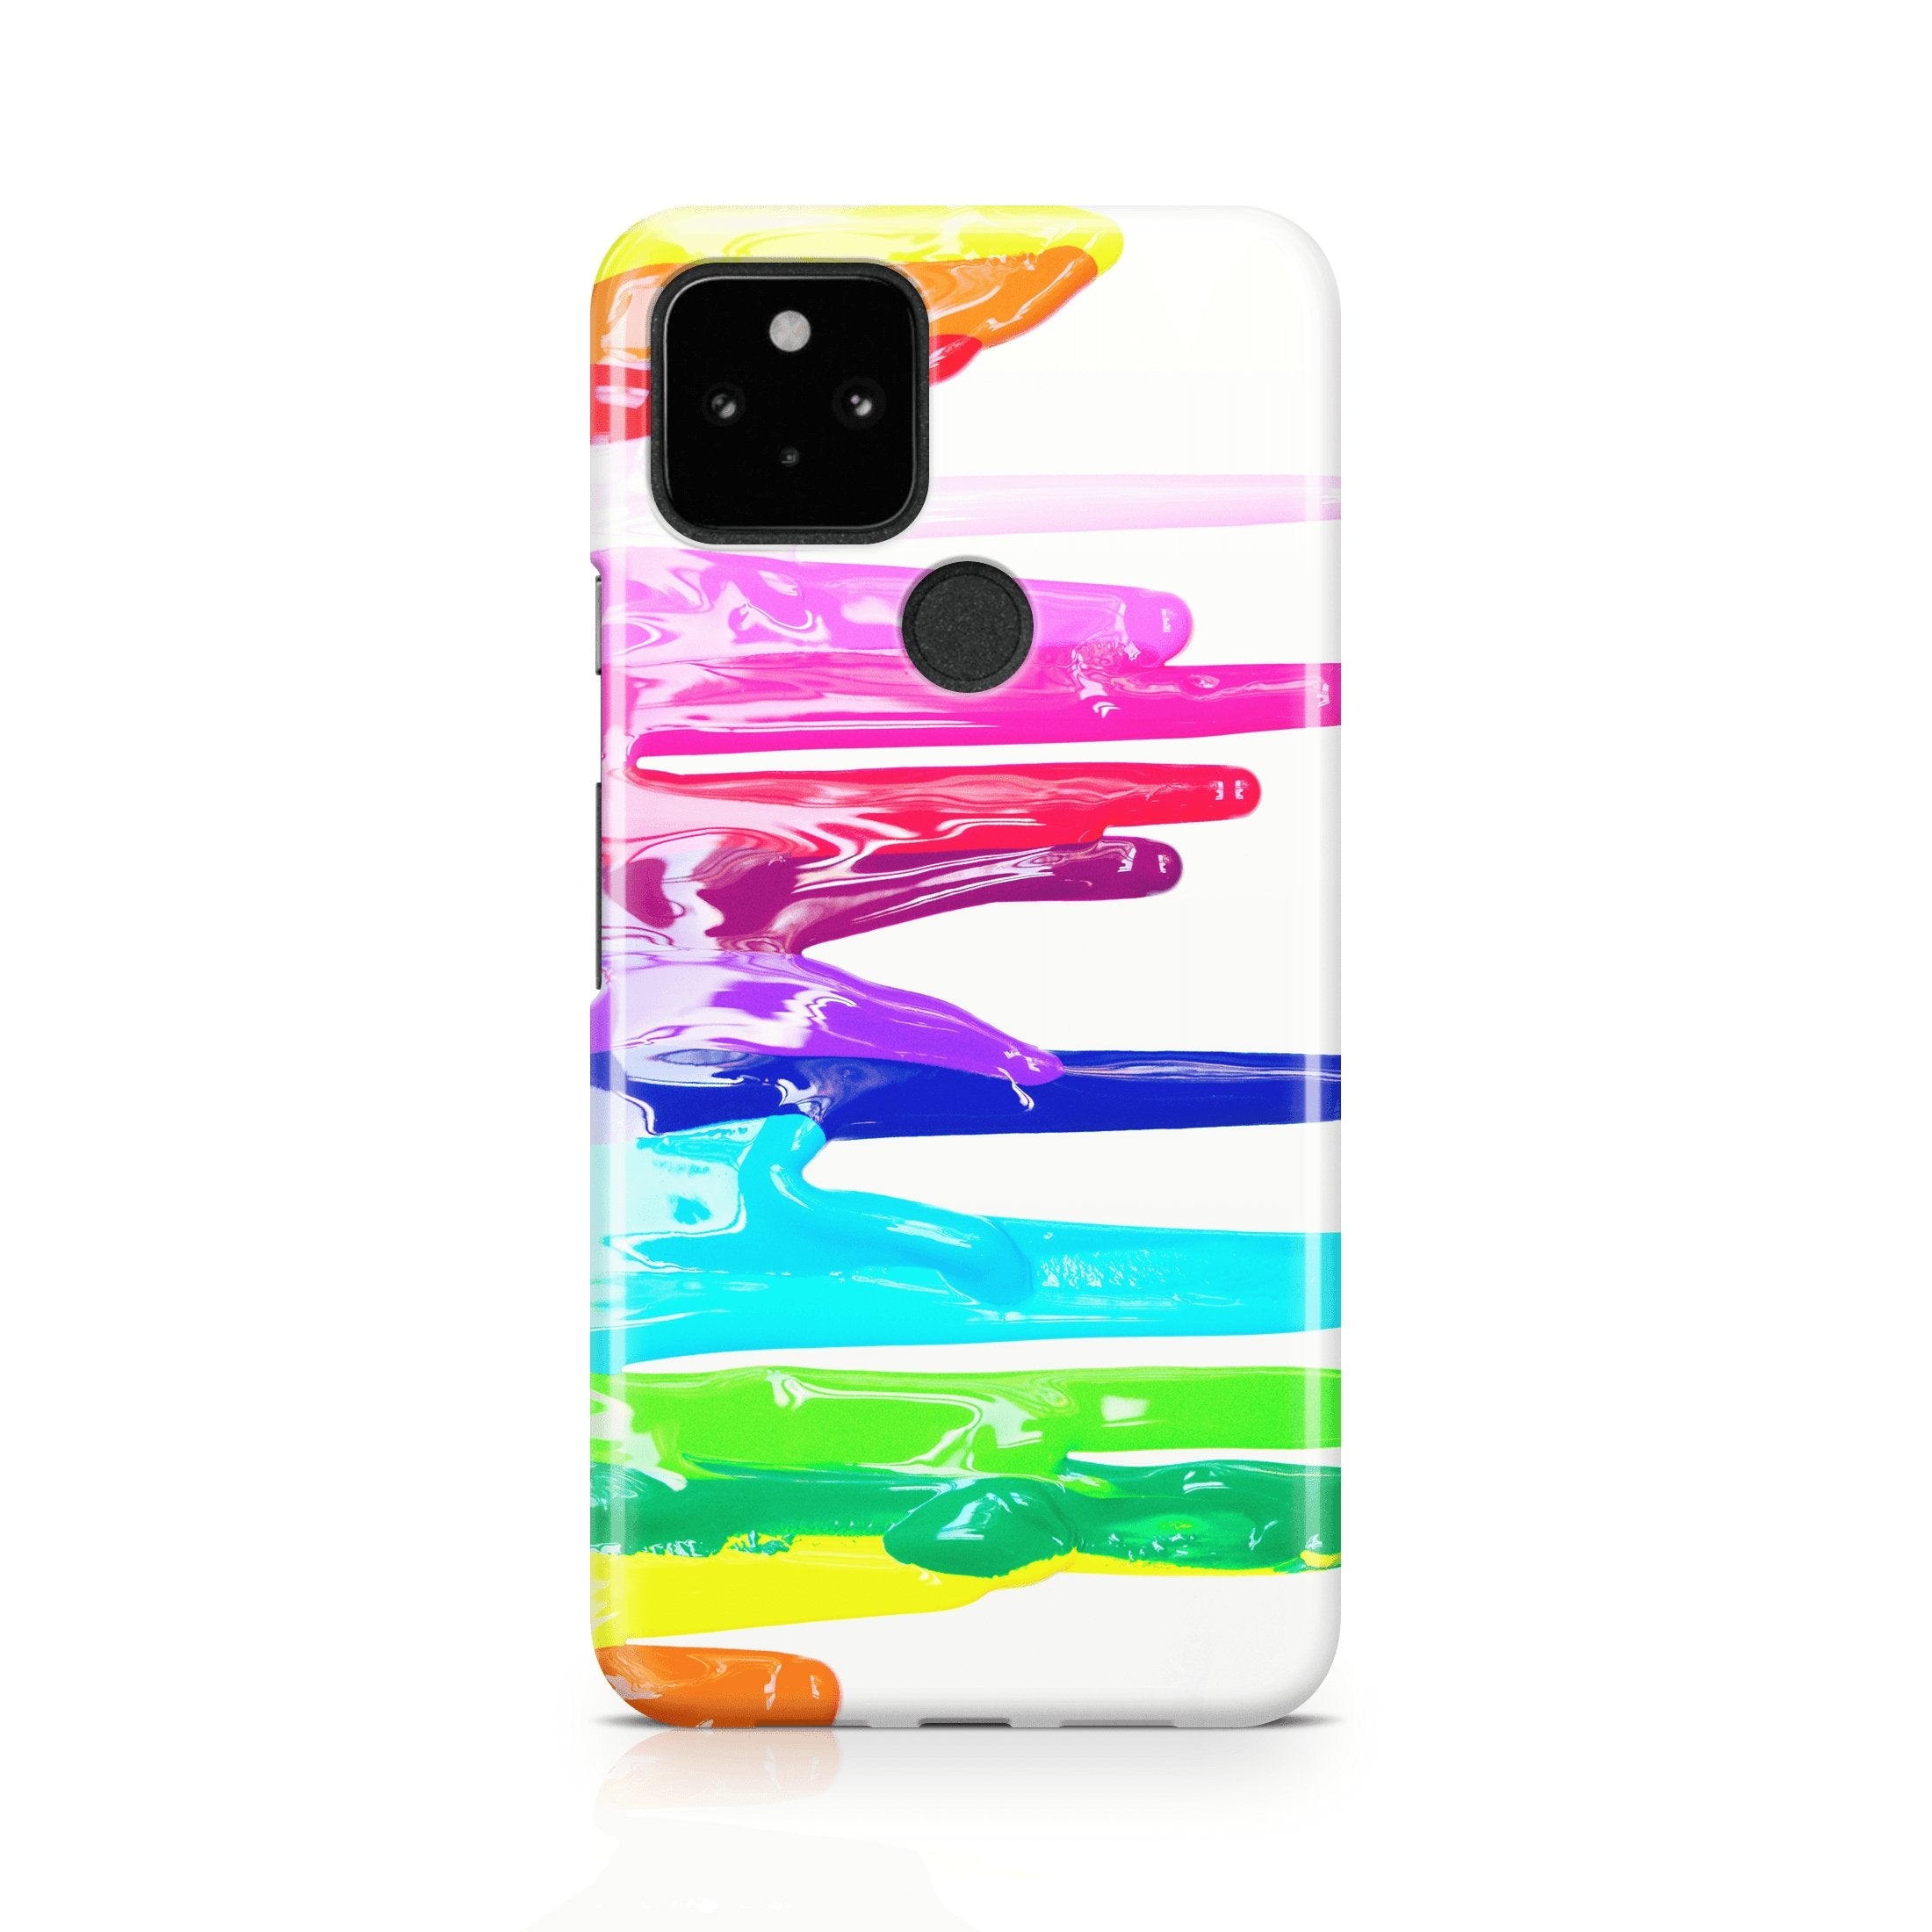 Color Bleed - Google phone case designs by CaseSwagger